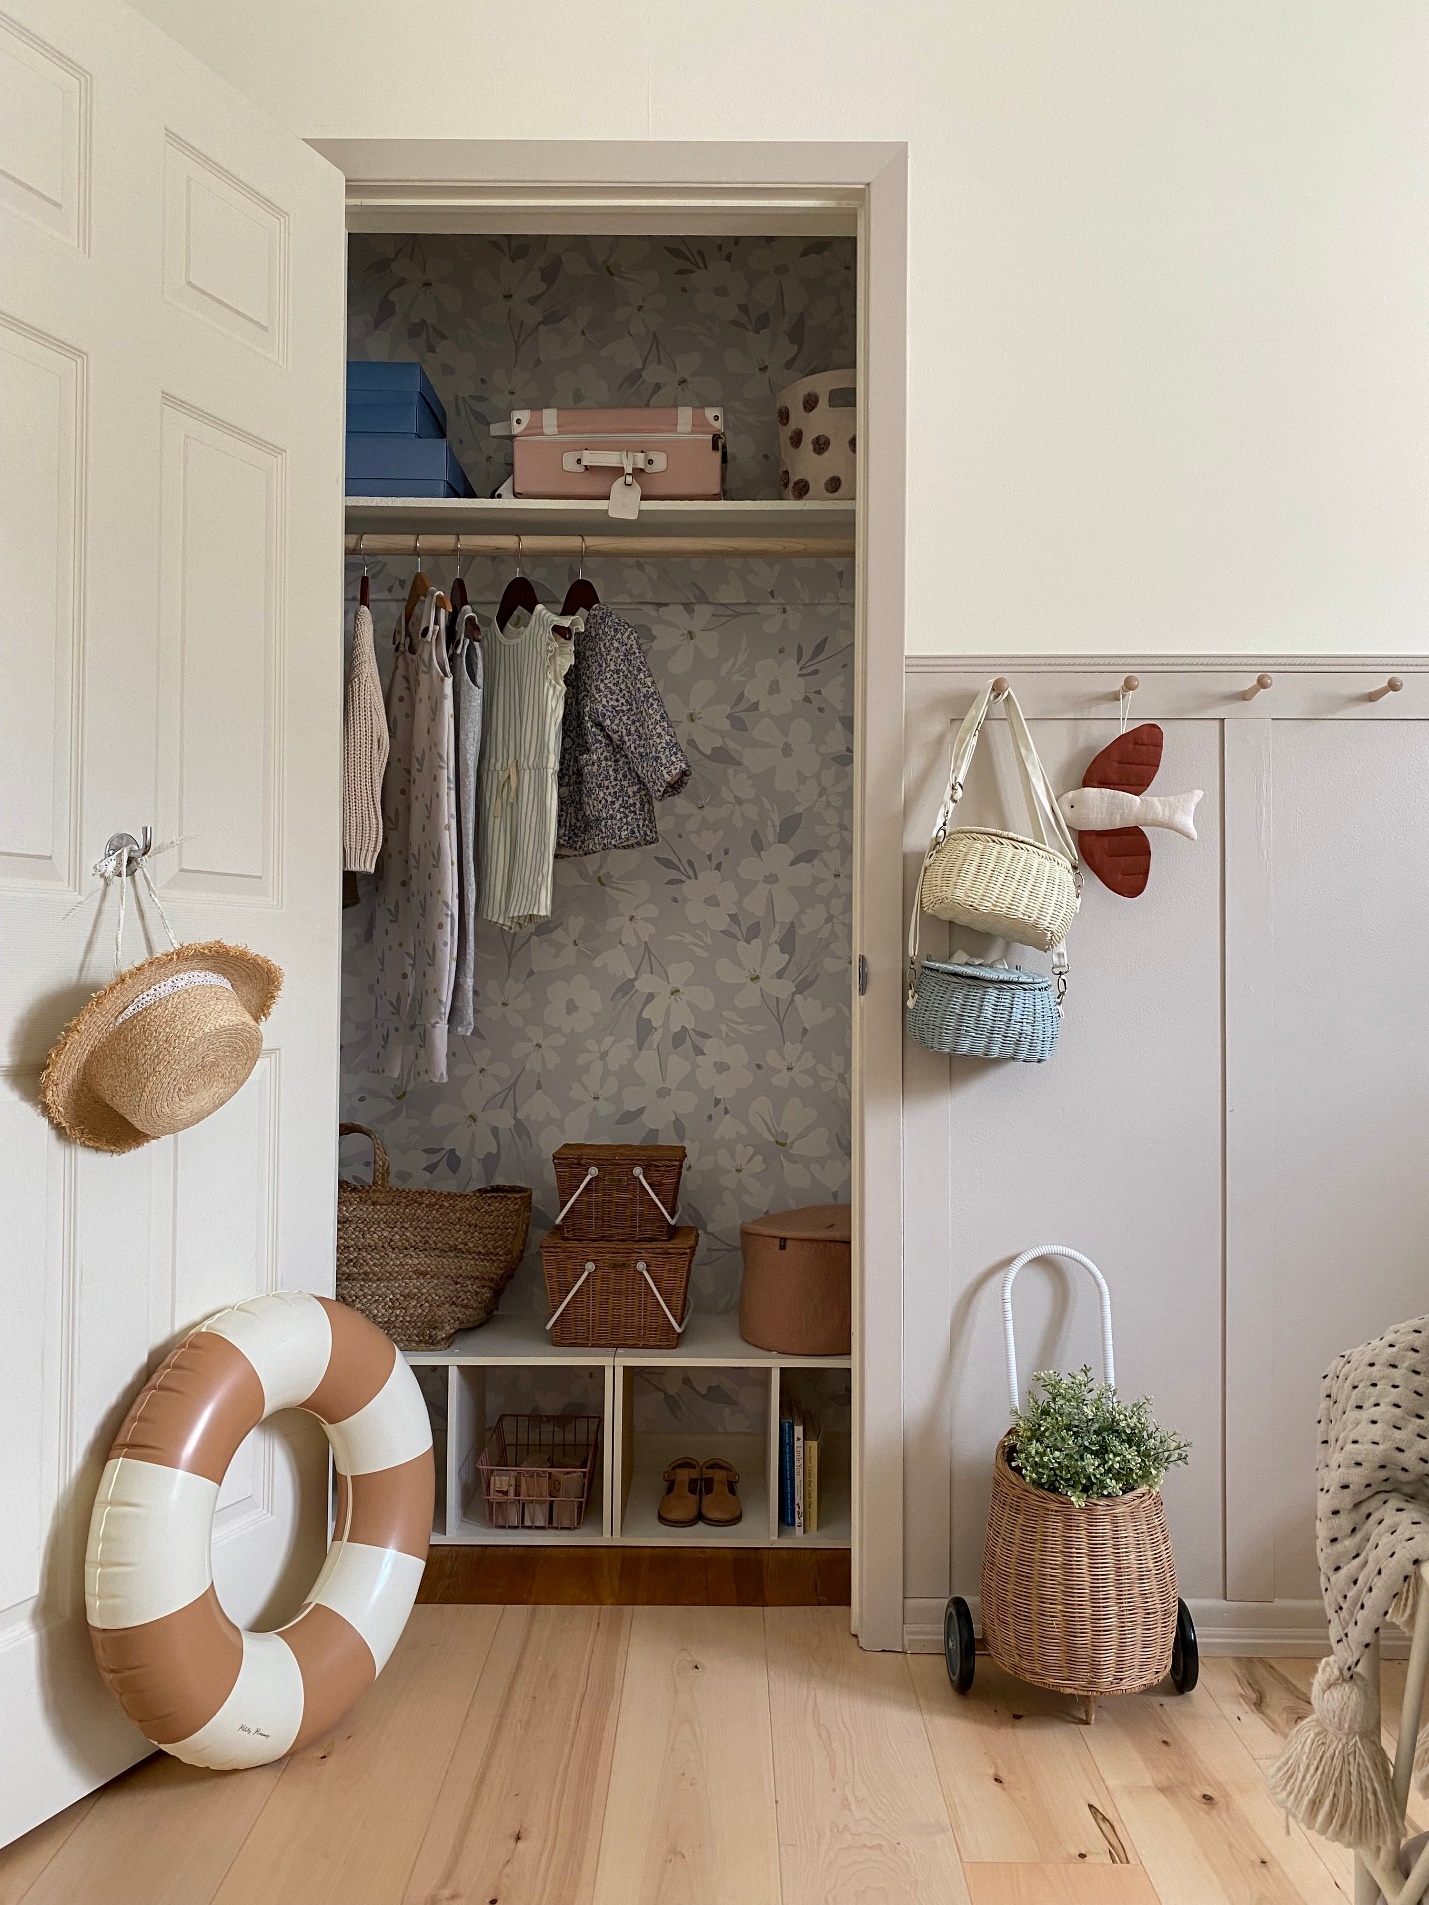 A closet with clothes and baskets Description automatically generated